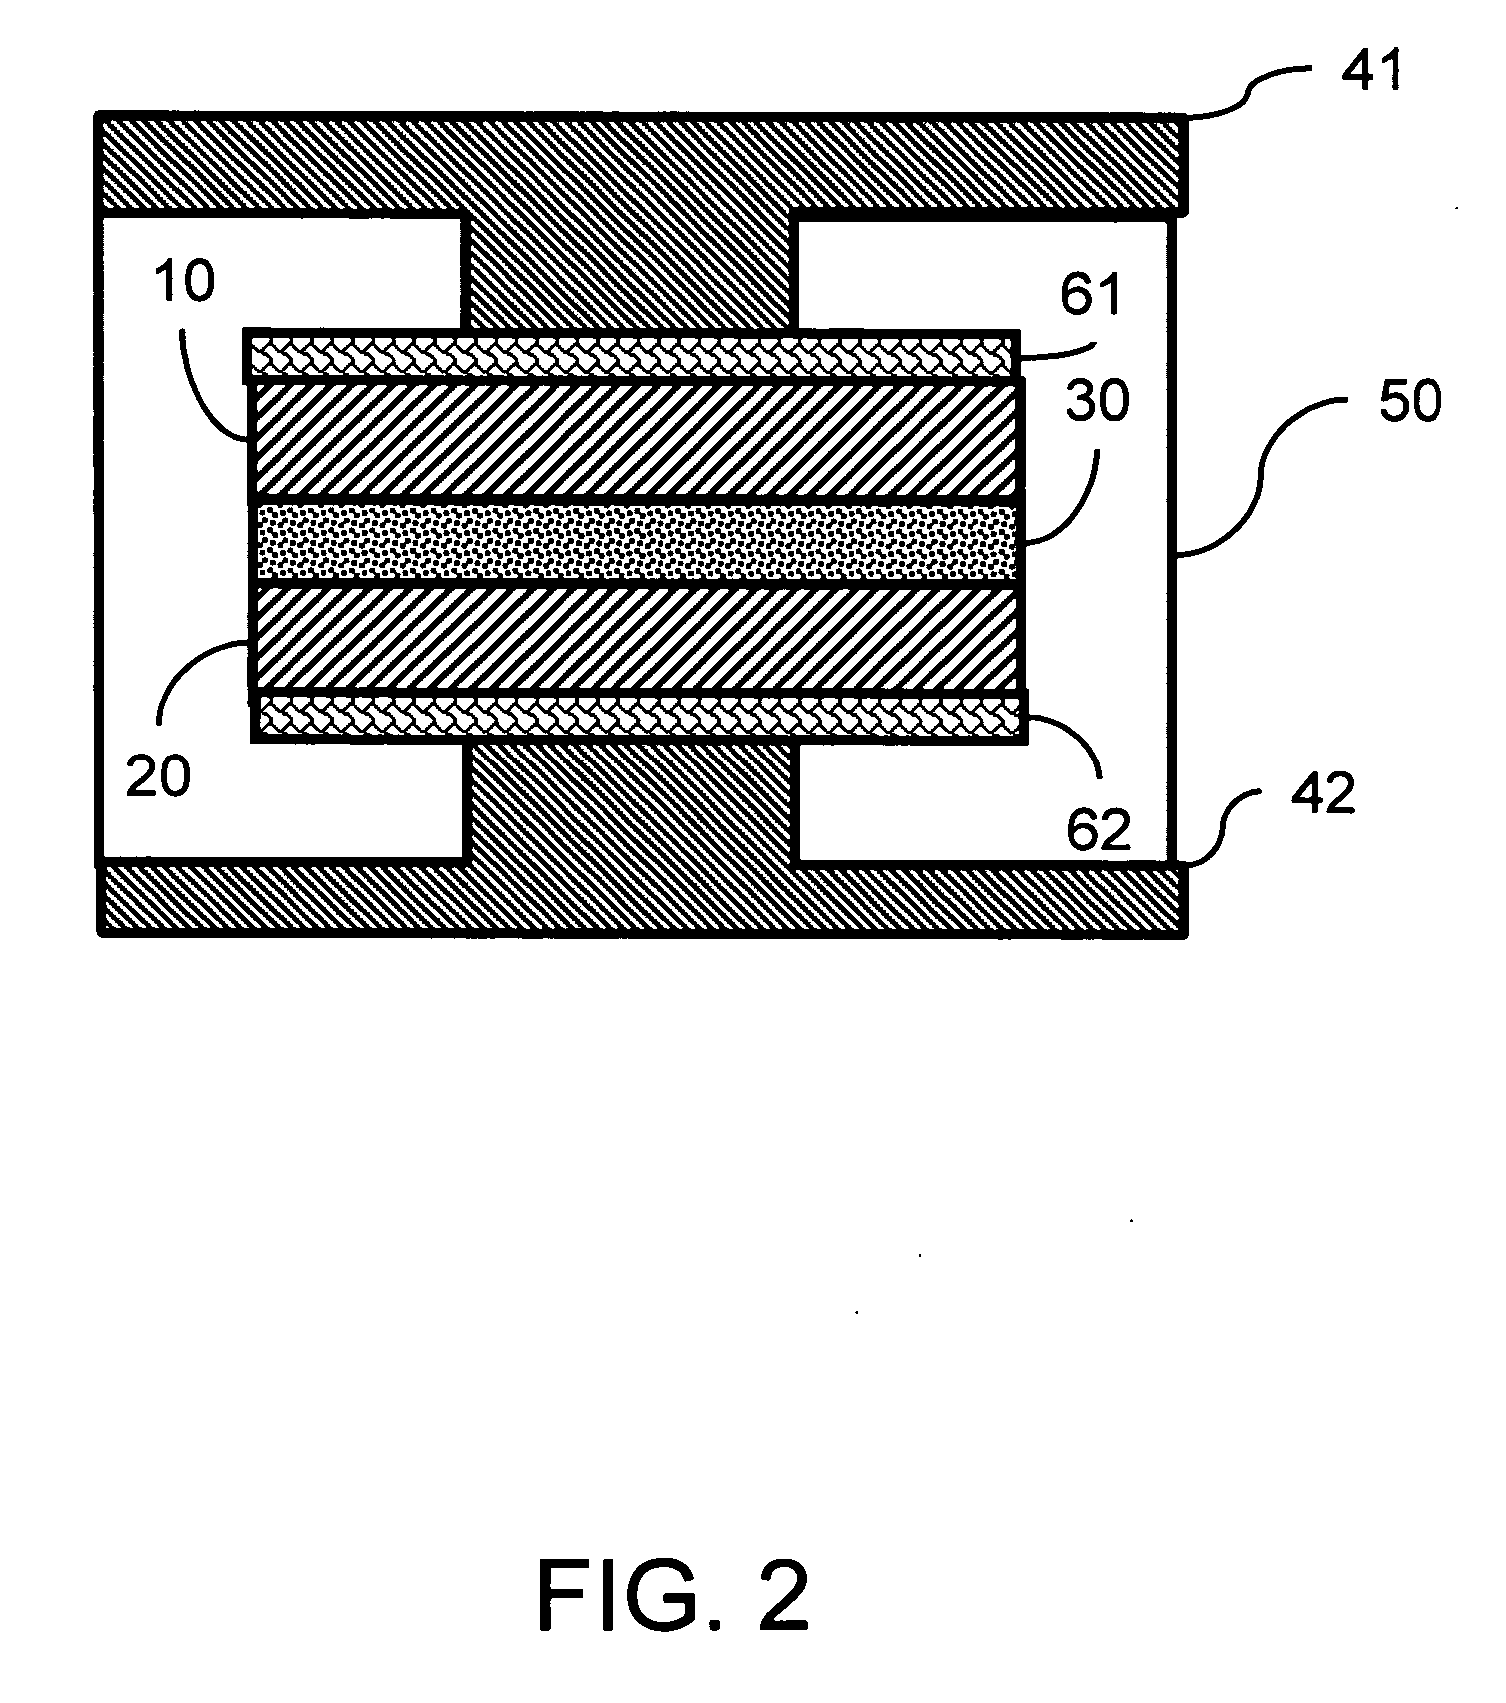 Multilevel phase-change memory, manufacturing and status transferring method thereof